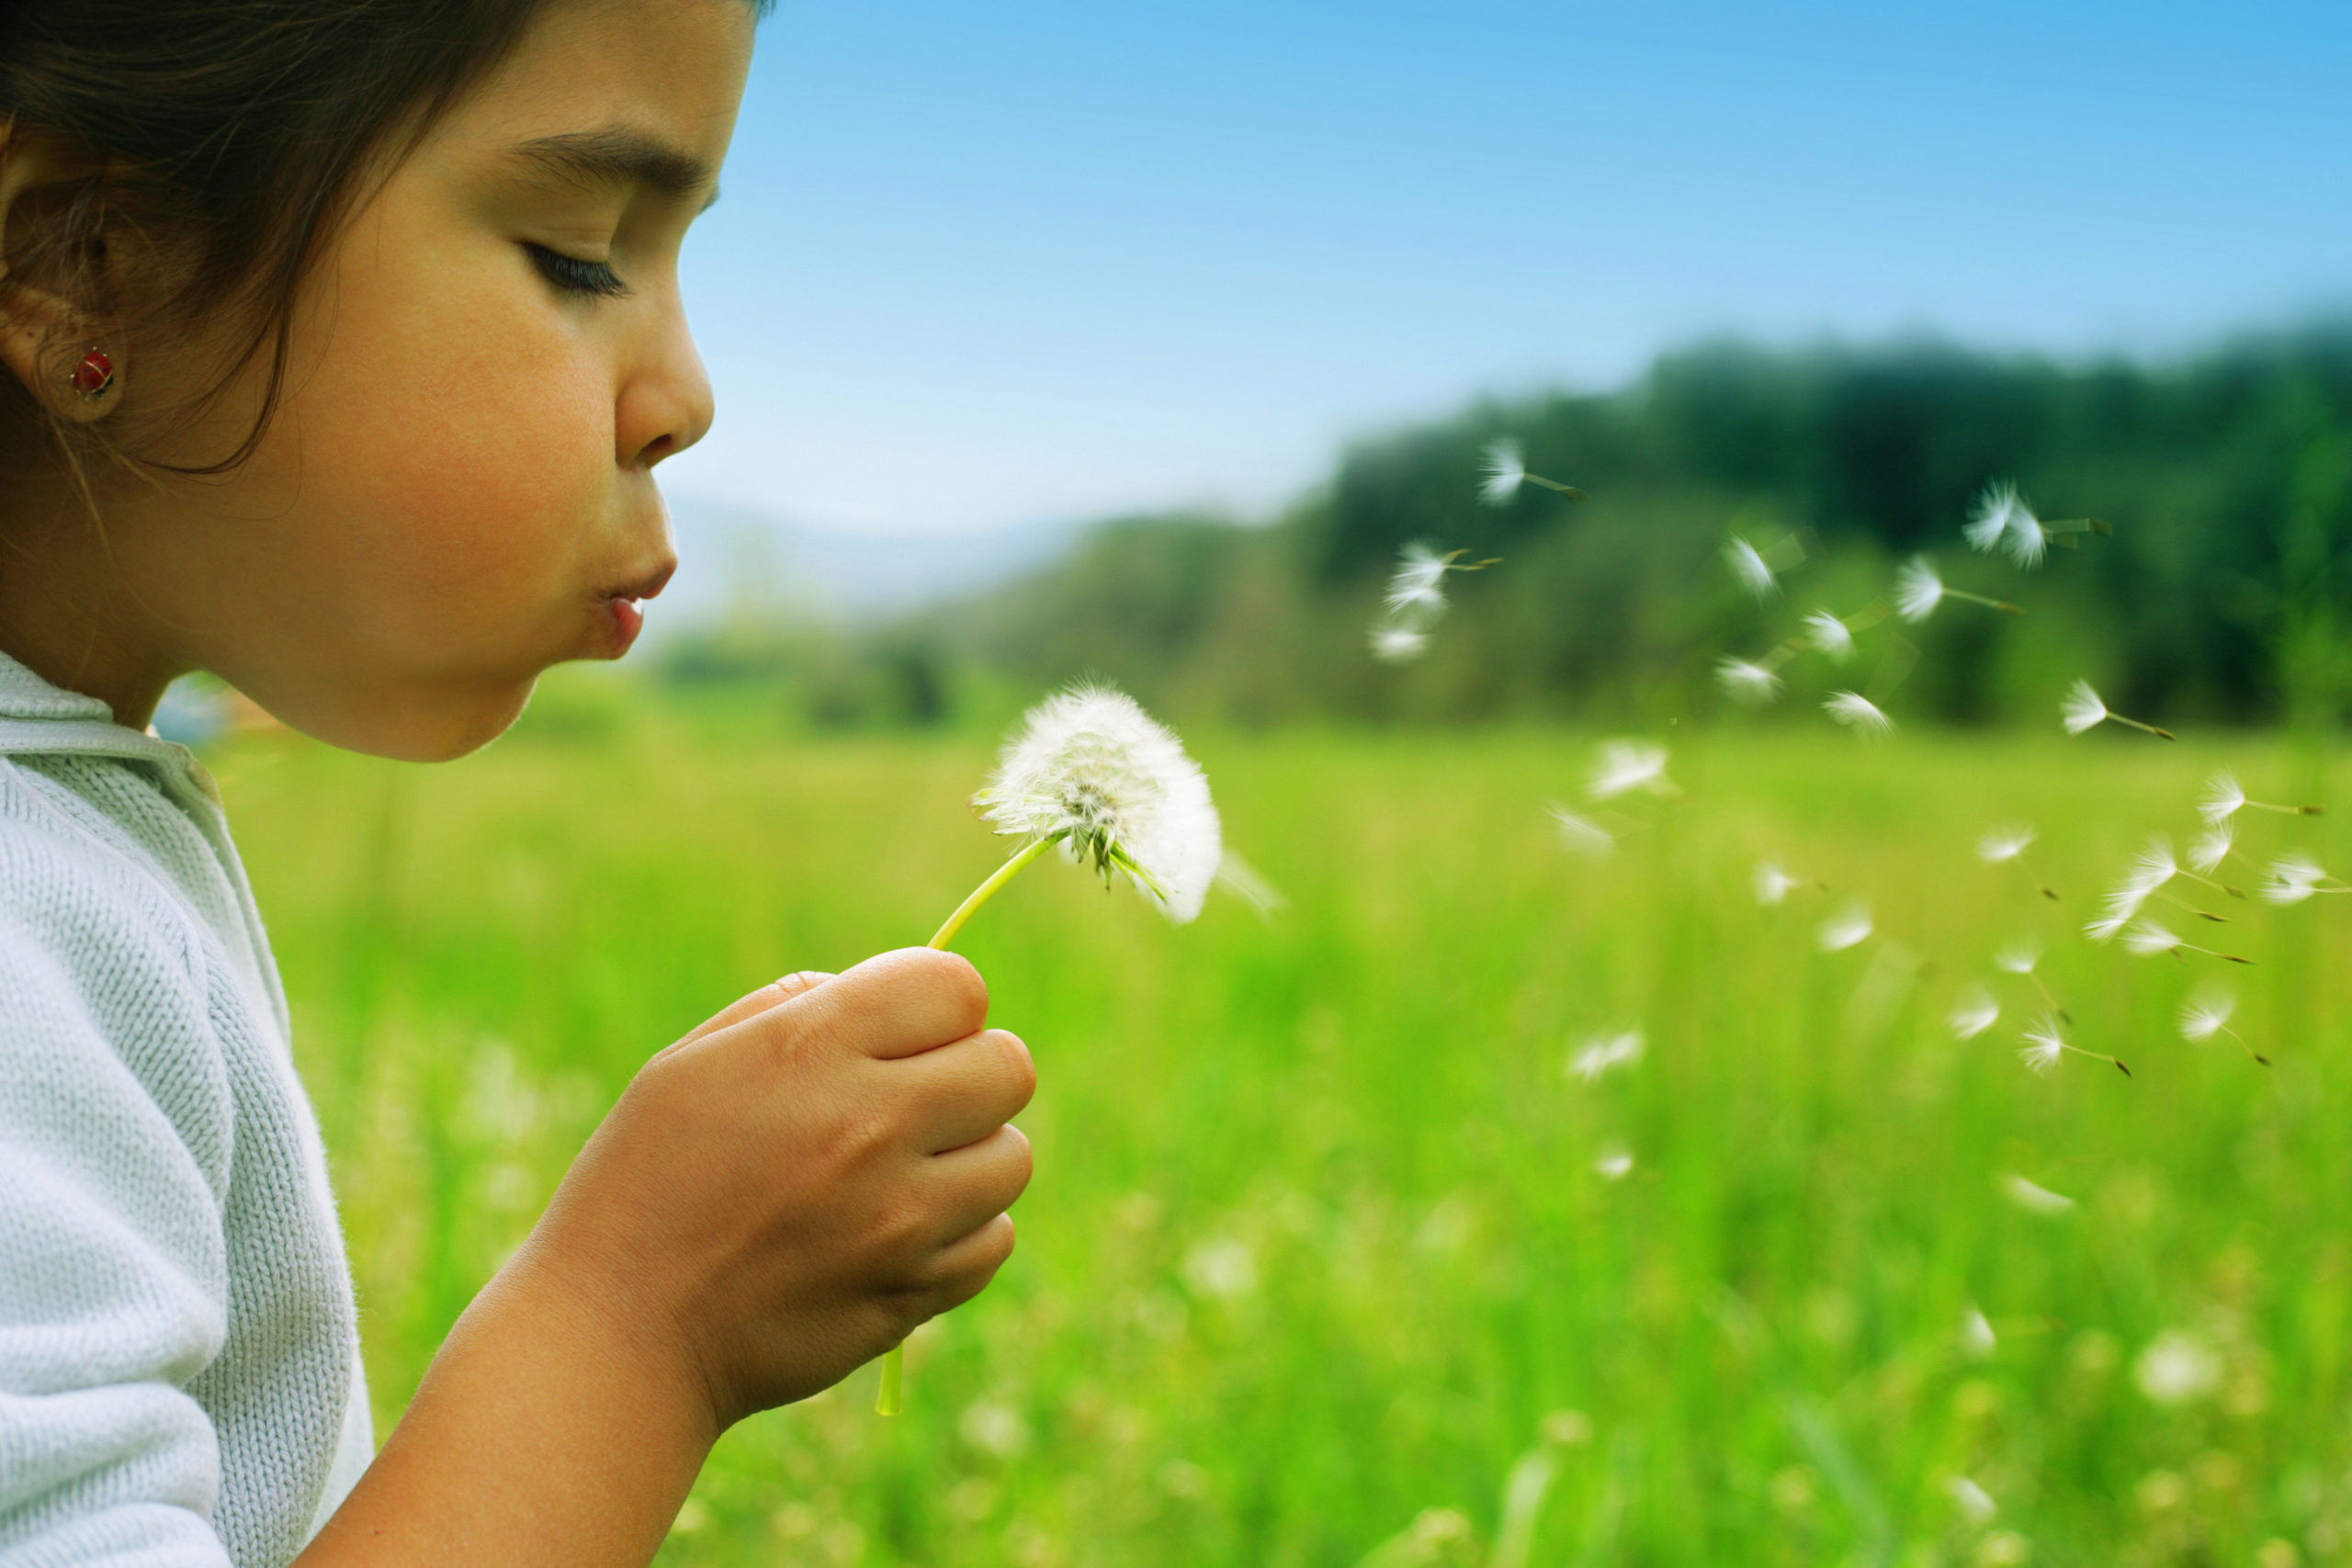 A child wishes on a dandelion, blowing seeds into a green field on a sunny day.